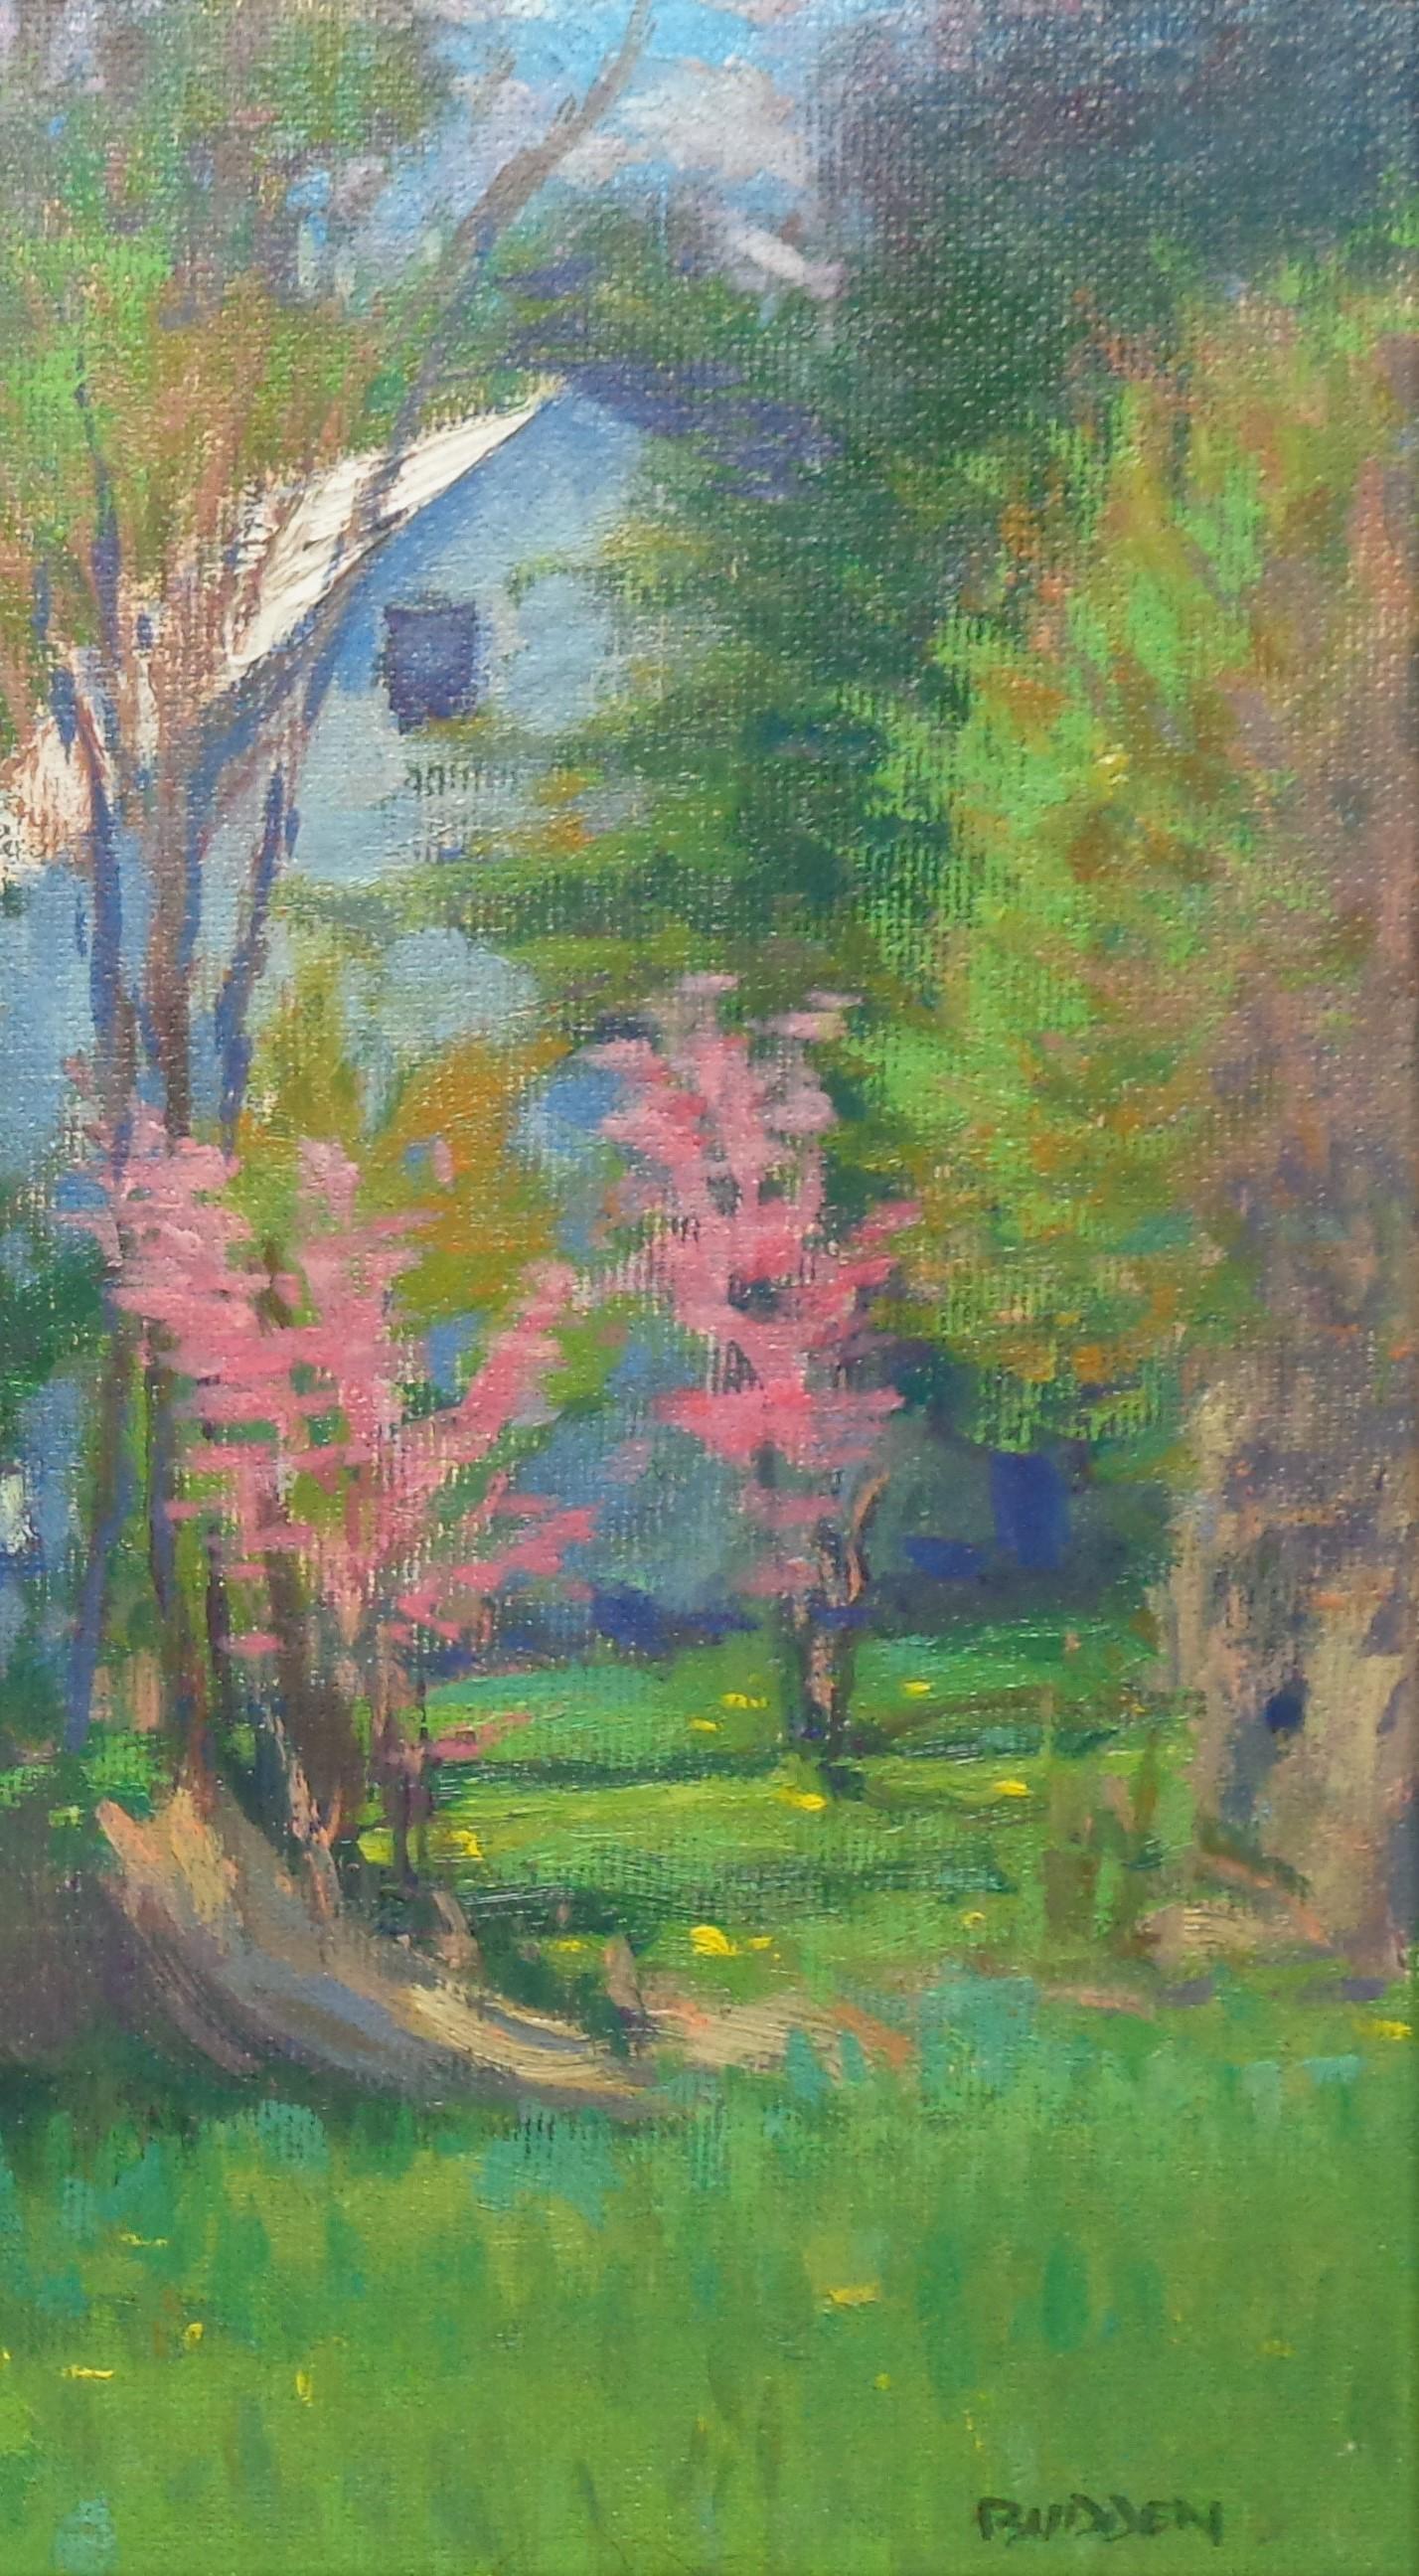  Impressionistic Floral Landscape Oil Painting by Michael Budden Early Spring For Sale 4